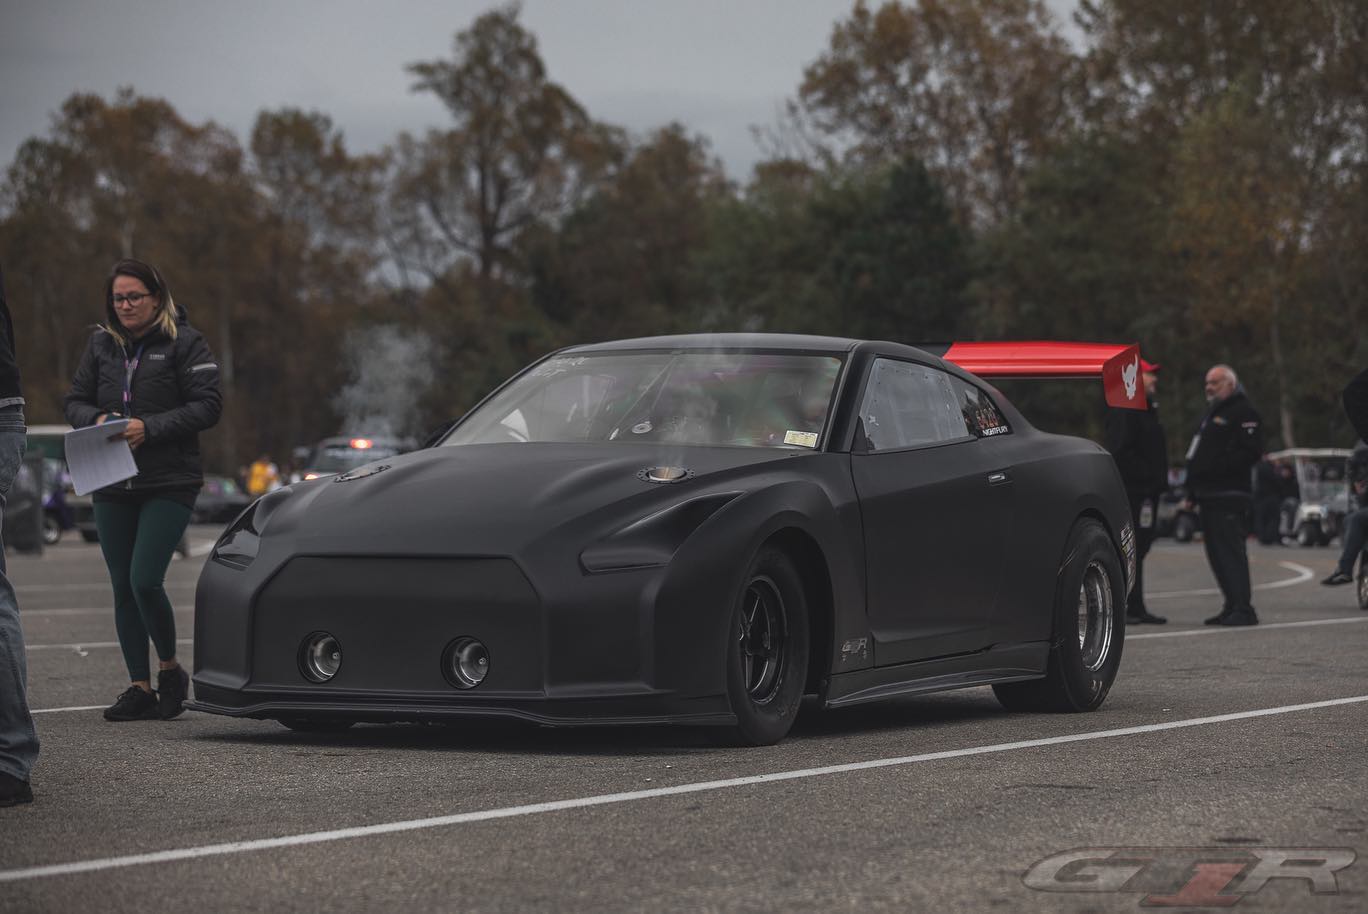 NEW GTR World Record Meet the Quickest R35 GTR in the World